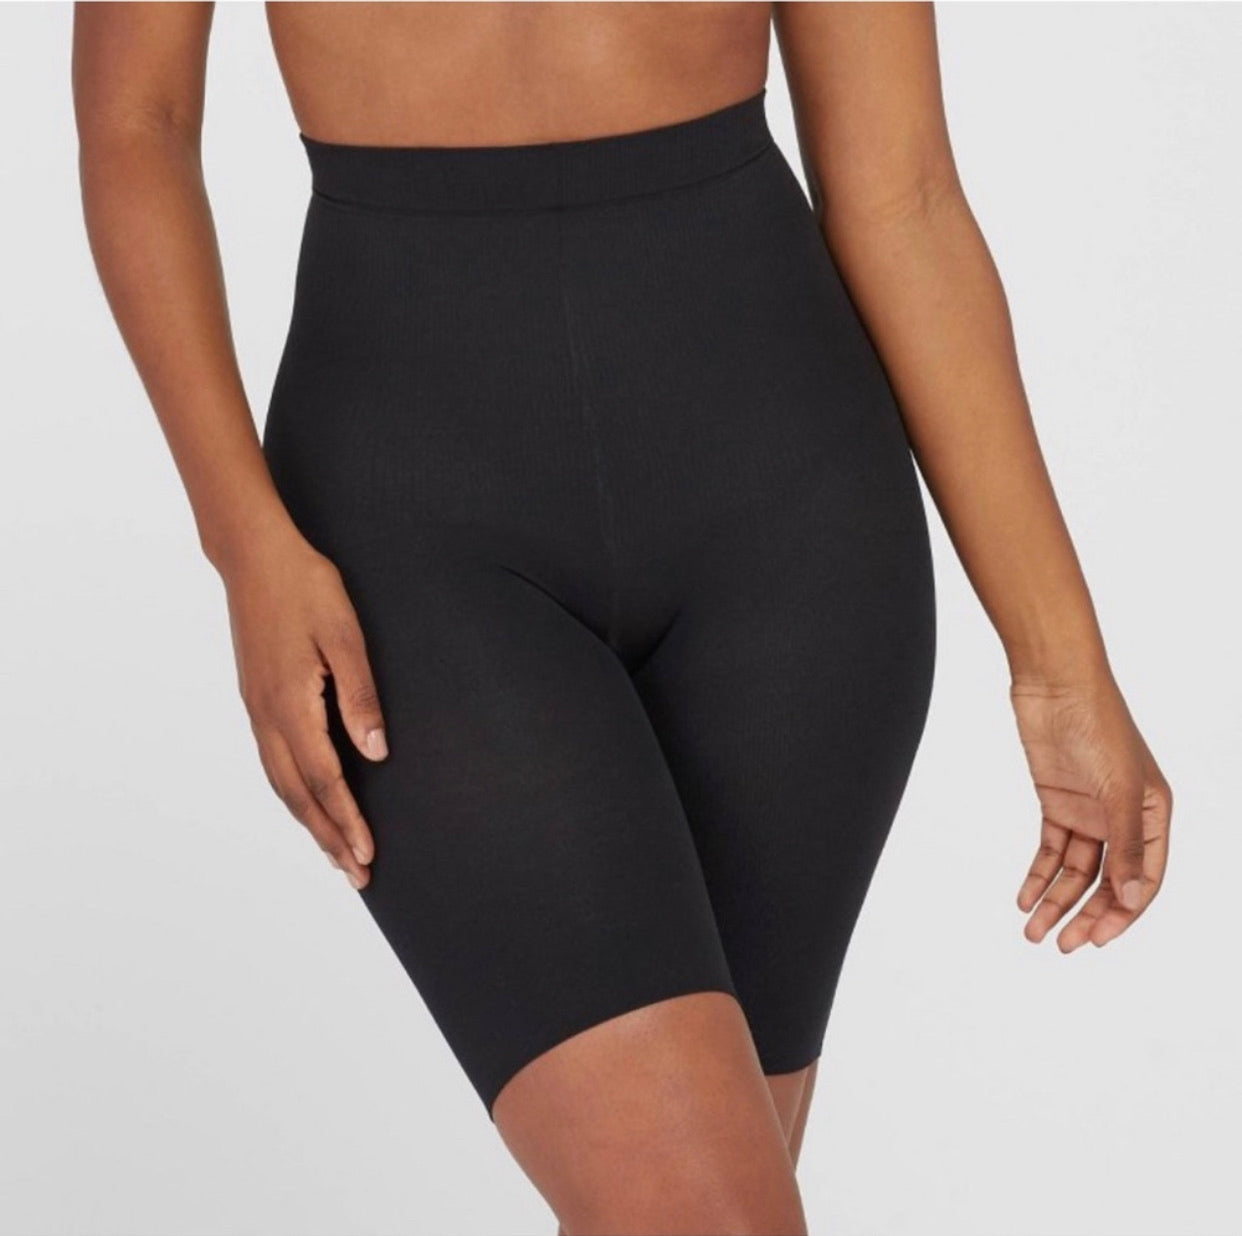 Spanx Mid Thigh Shapers size G